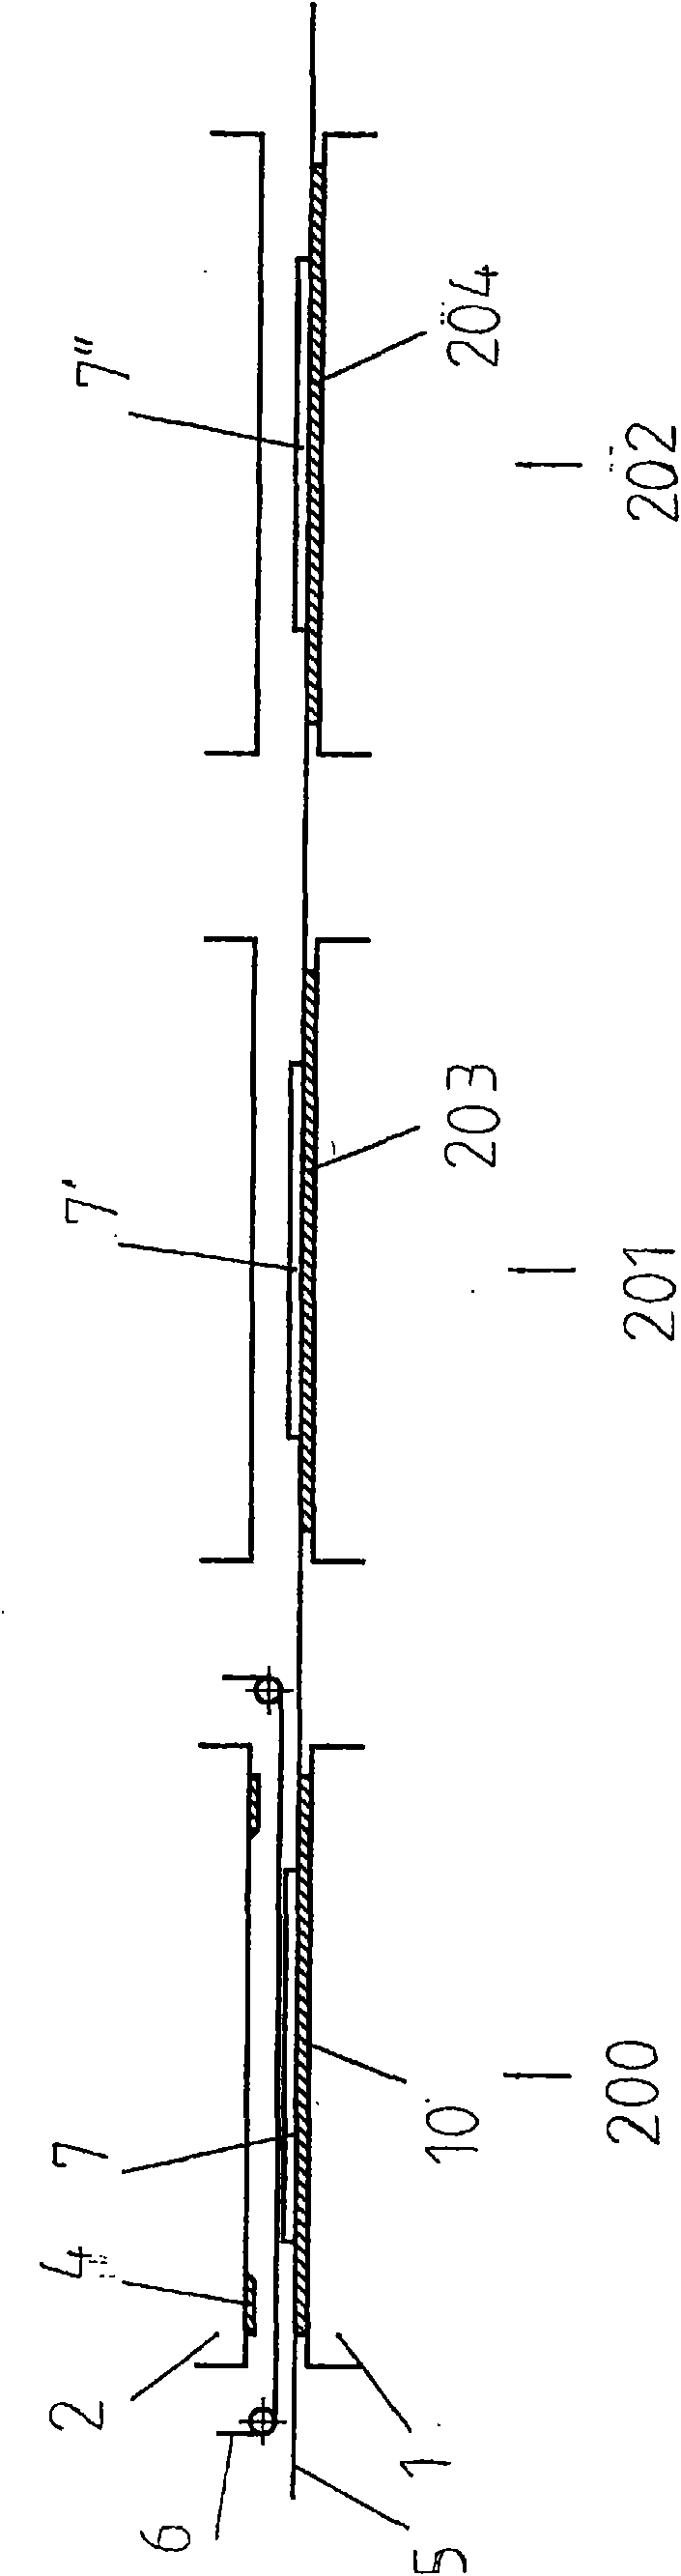 Method and device for laminating mainly plate-shaped workpieces with the use of pressure and heat